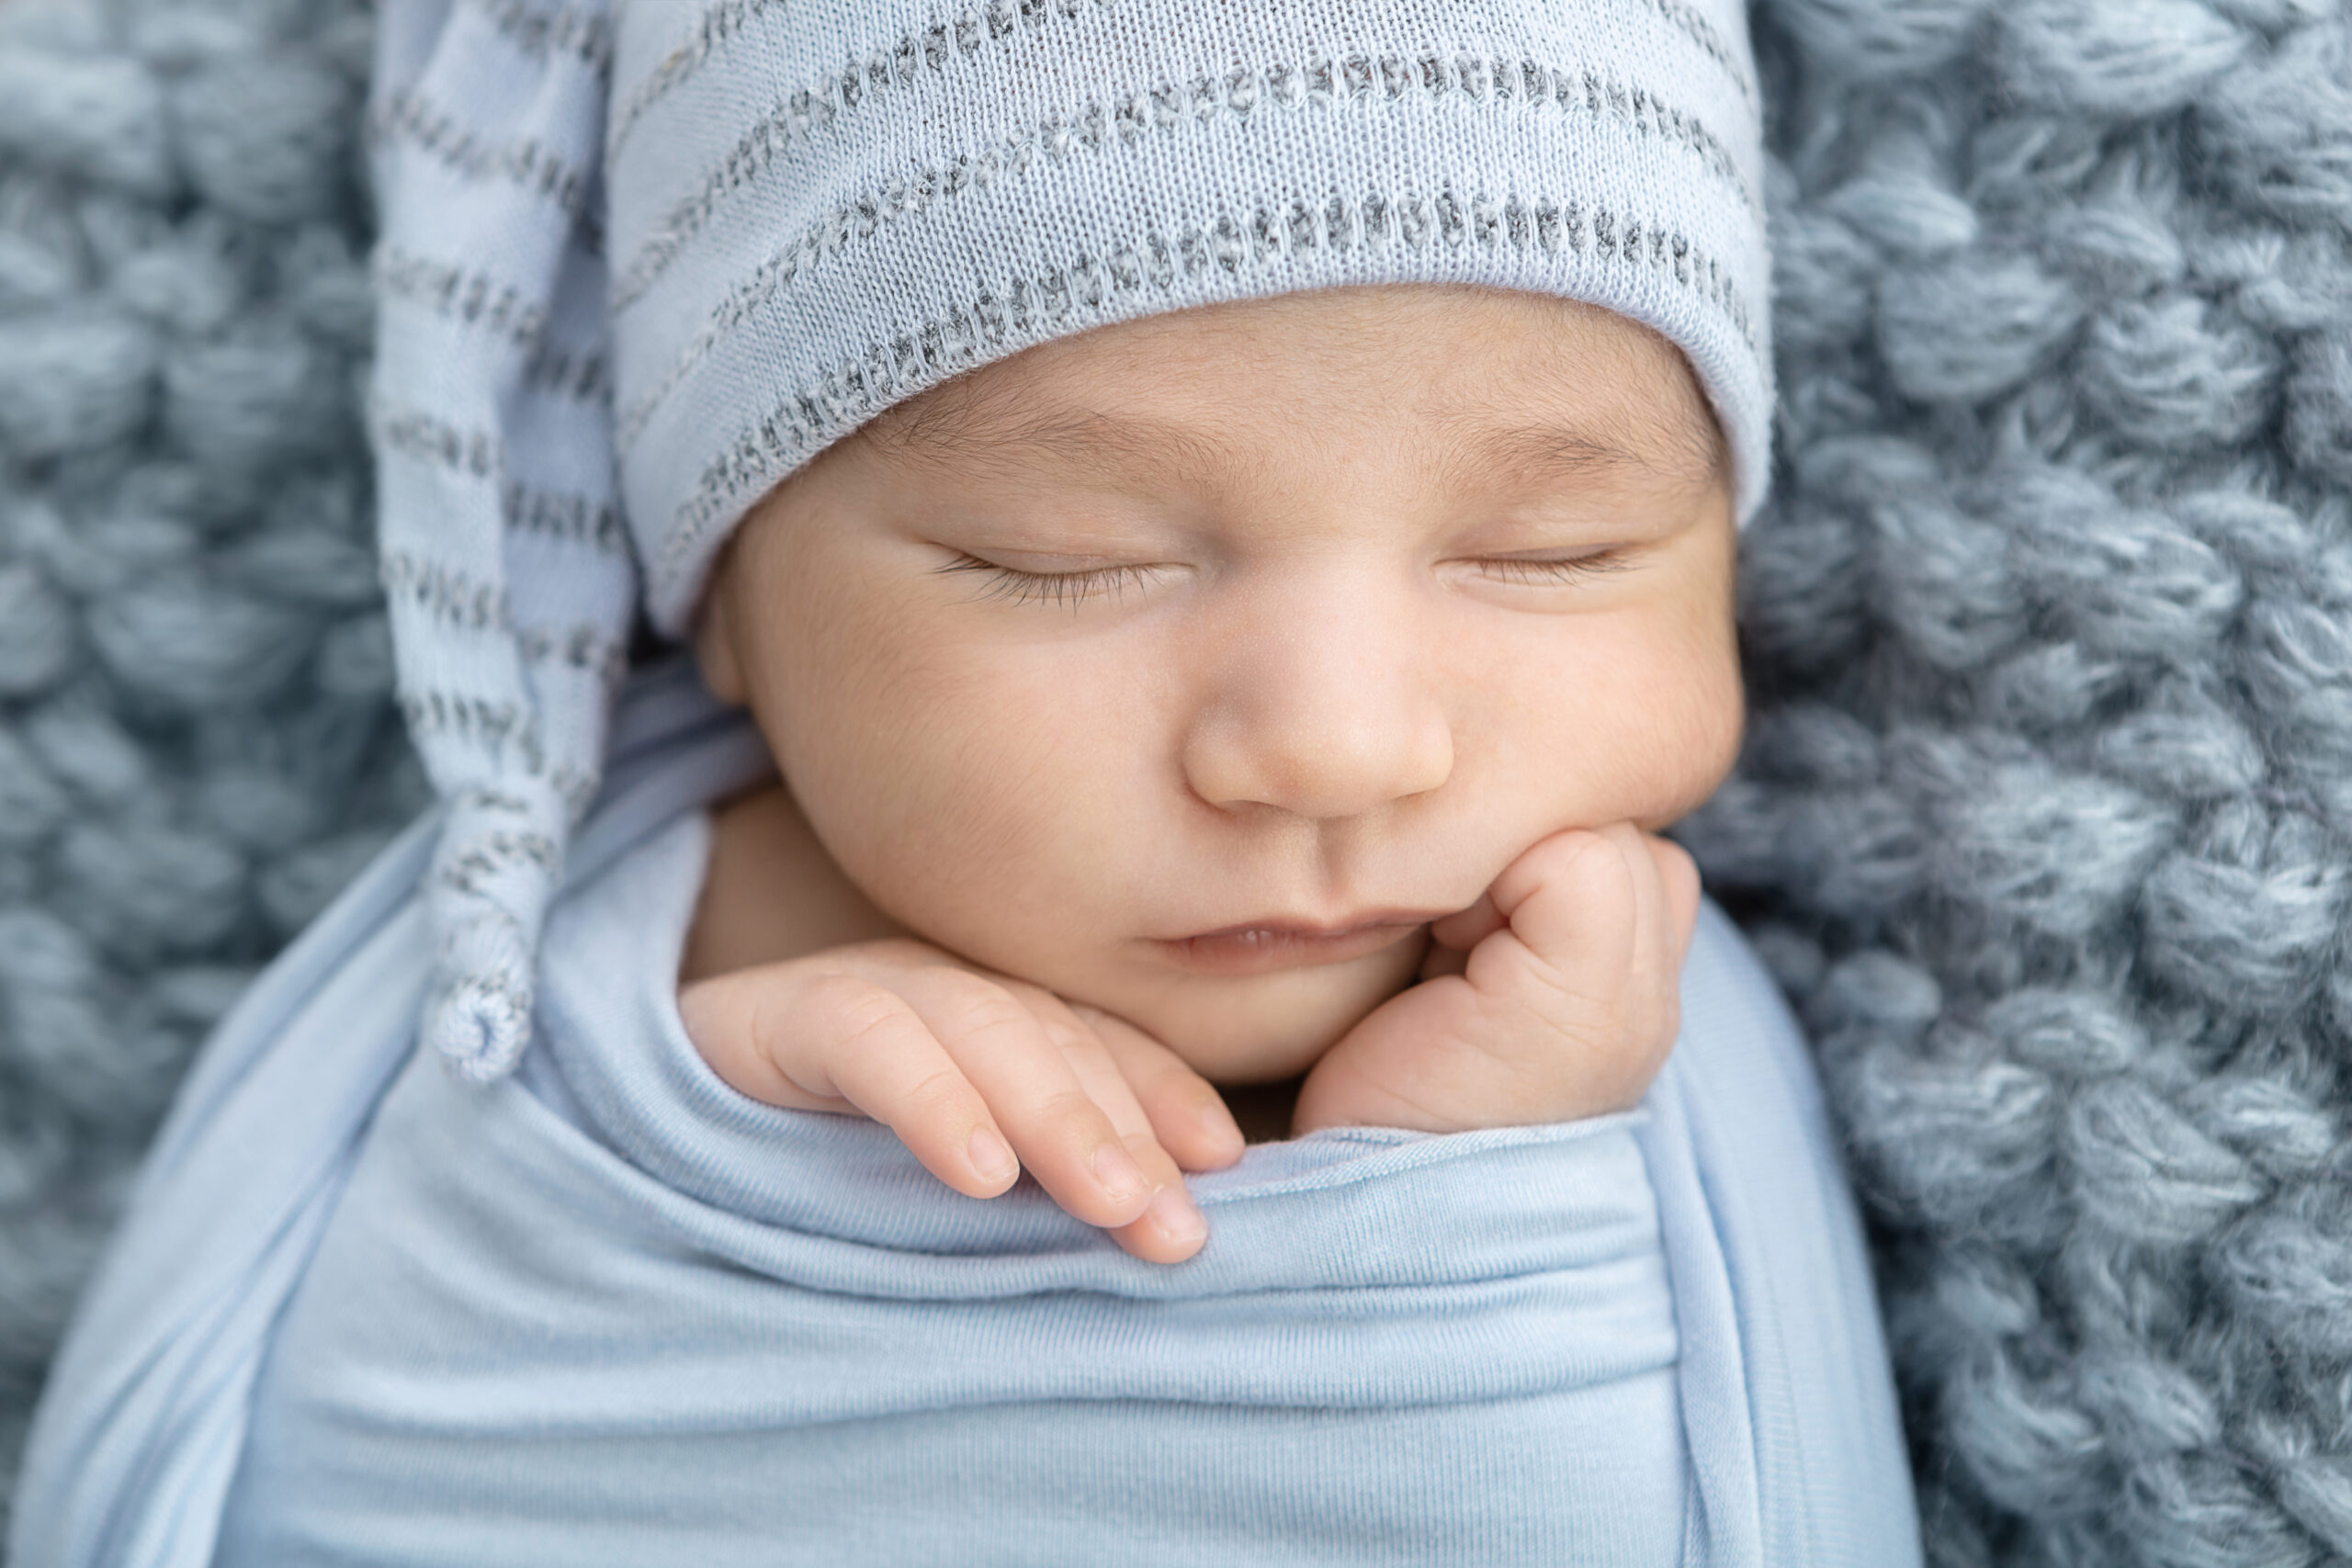 Newborn portrait session in the studio with baby boy wrapped in light blue laying on a soft knit light blue fabric and an adorable sleepy night cap hat in blue